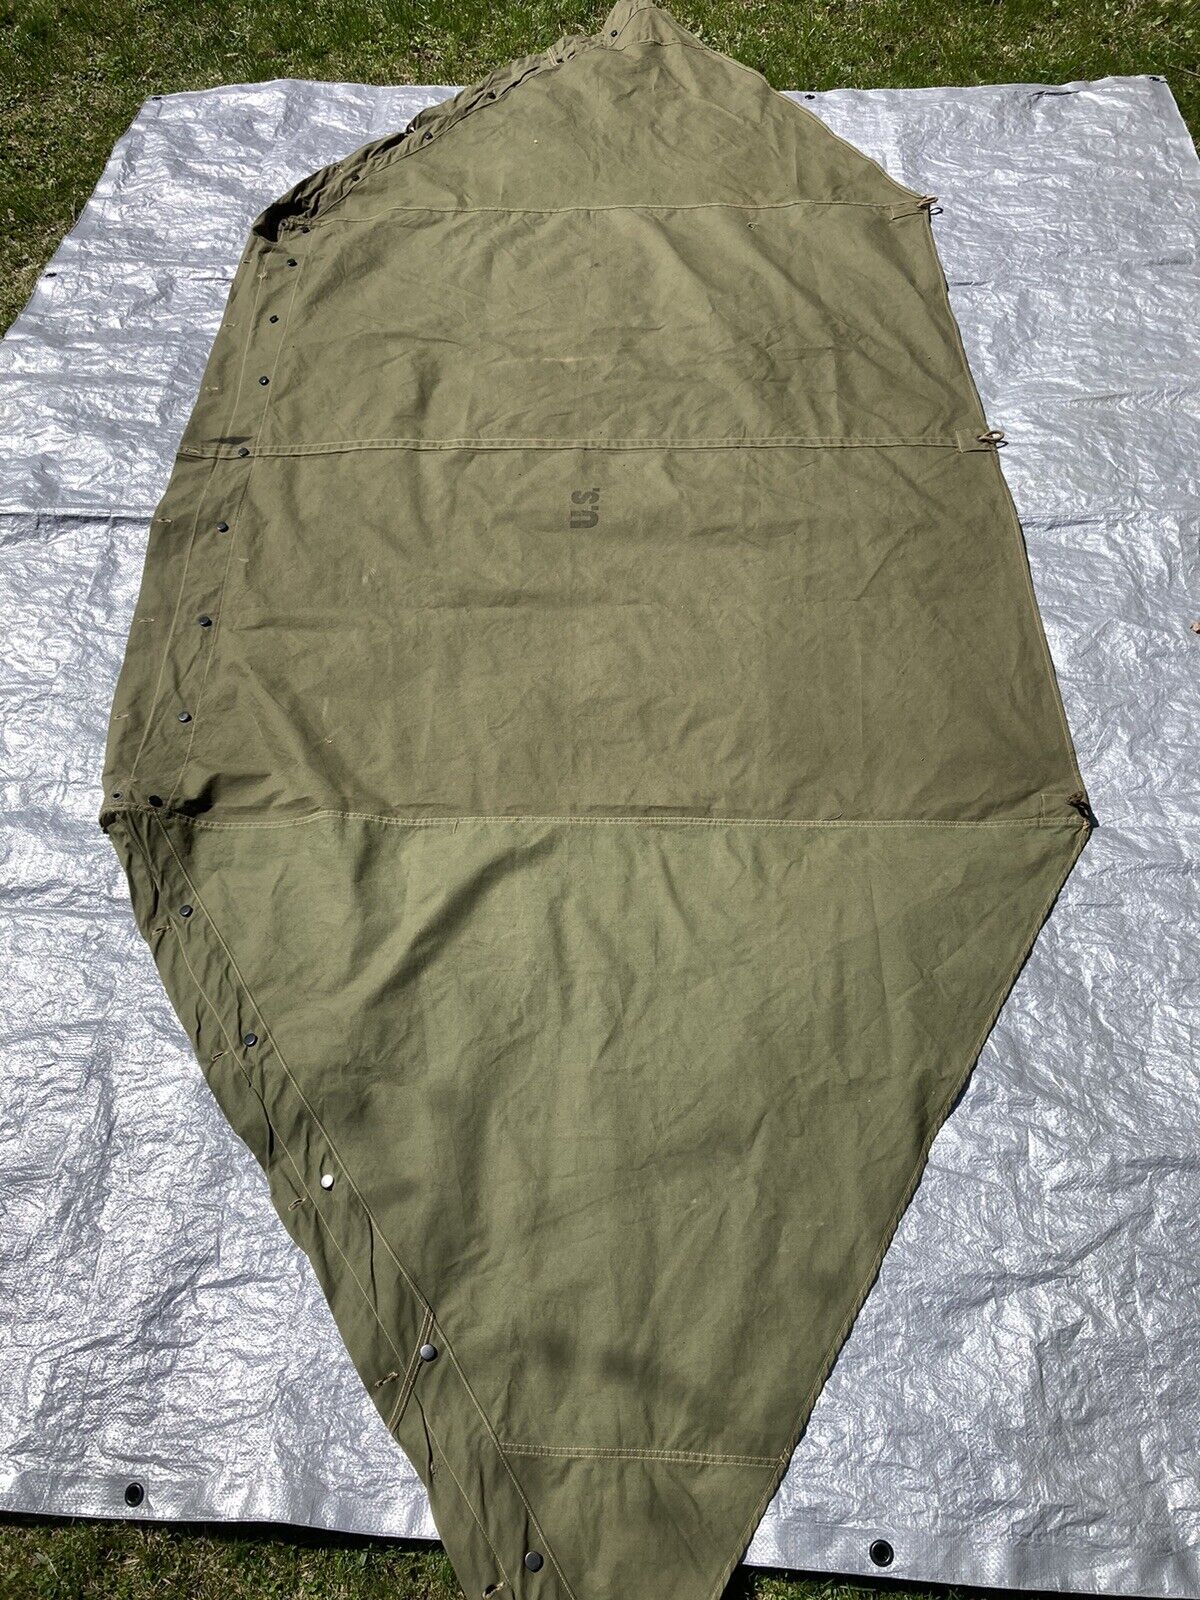 1945 WW2 US Army Shelter Half Pup Tent Fraser Products USA